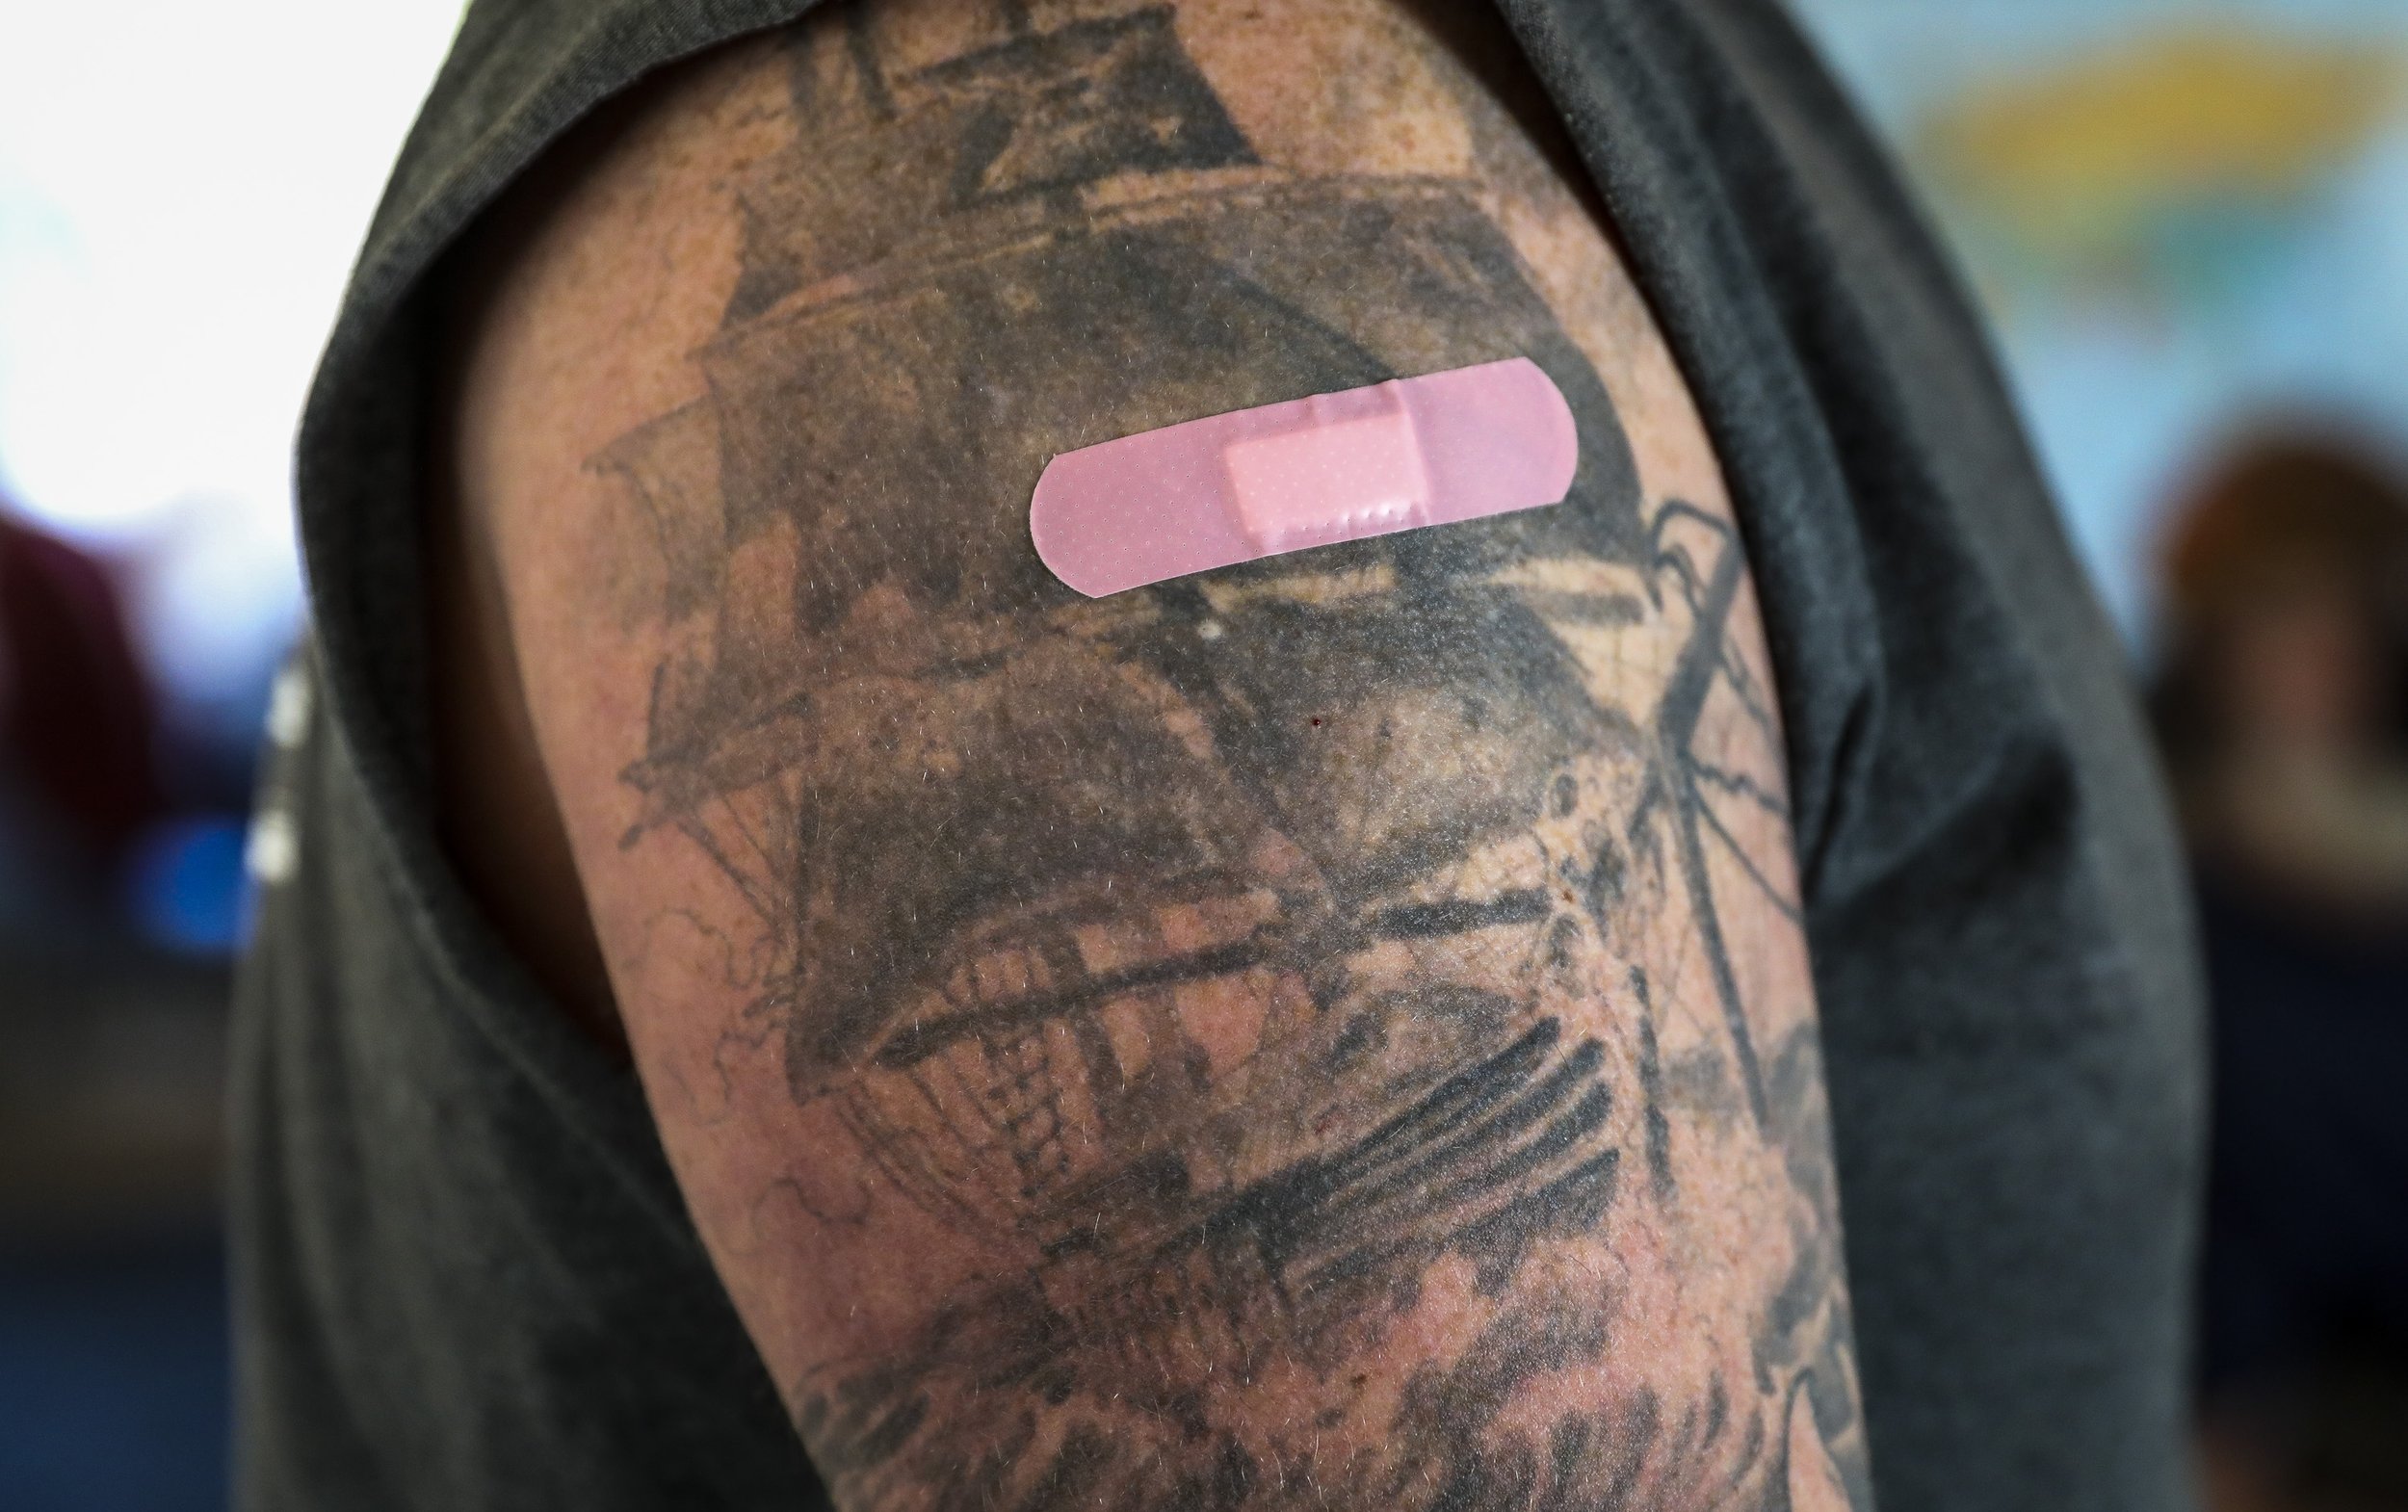  Seth Young receives a vaccine on an arm he had tattooed as an 18-year-old to pay tribute to his island roots. A map of the islands off the coast of Maine wraps around his arm like a treasure map; an X marks Matinicus, where he grew up.   